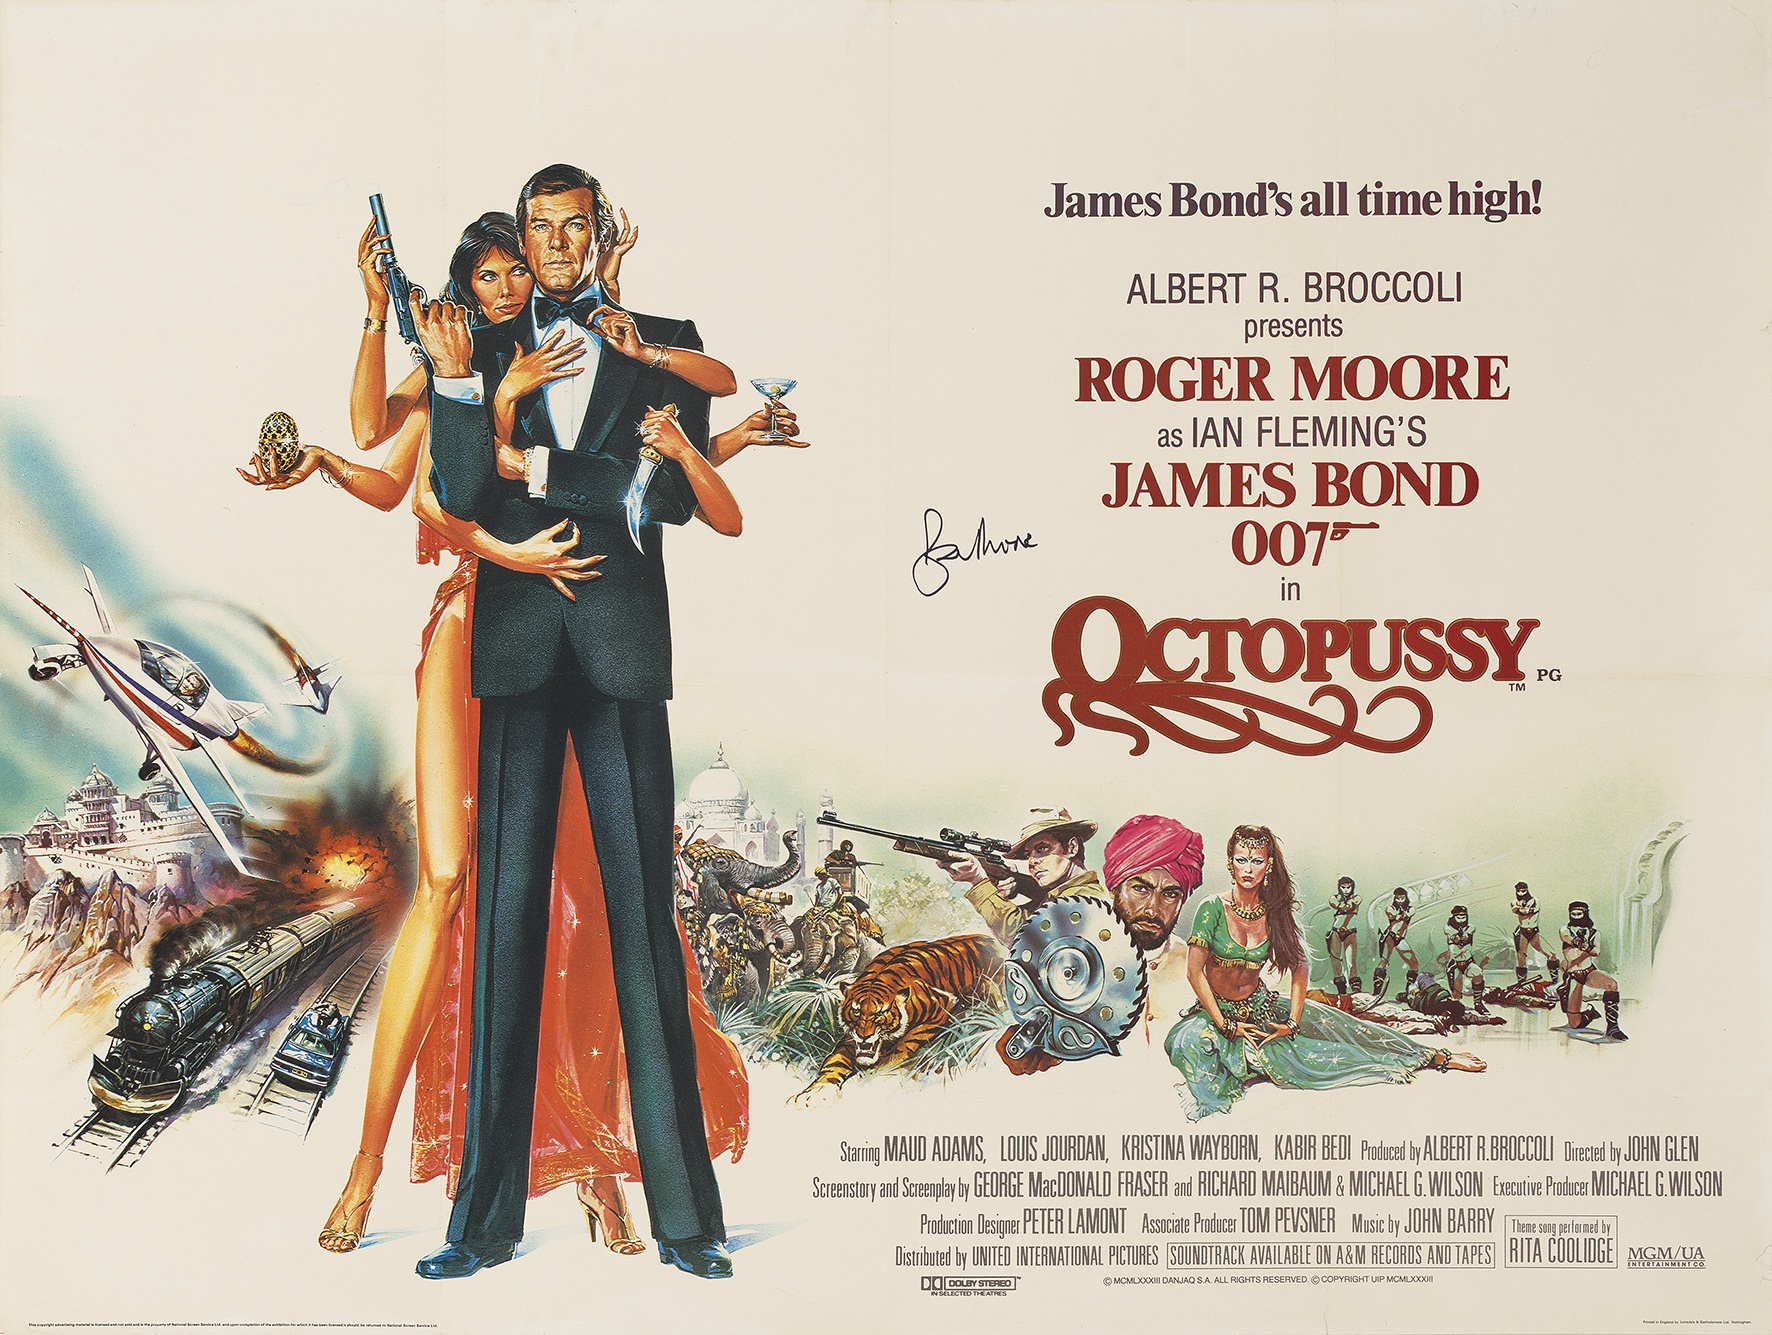 DAN GOOZEE (B.1943) AND RENATO CASARO (B. 1935)  OCTOPUSSY  offset lithographic poster, 1983, signed by Roger Moore, British Quad  30 x 40 in. (76 x 102 cm)  £1,500 - 2,000 + fees